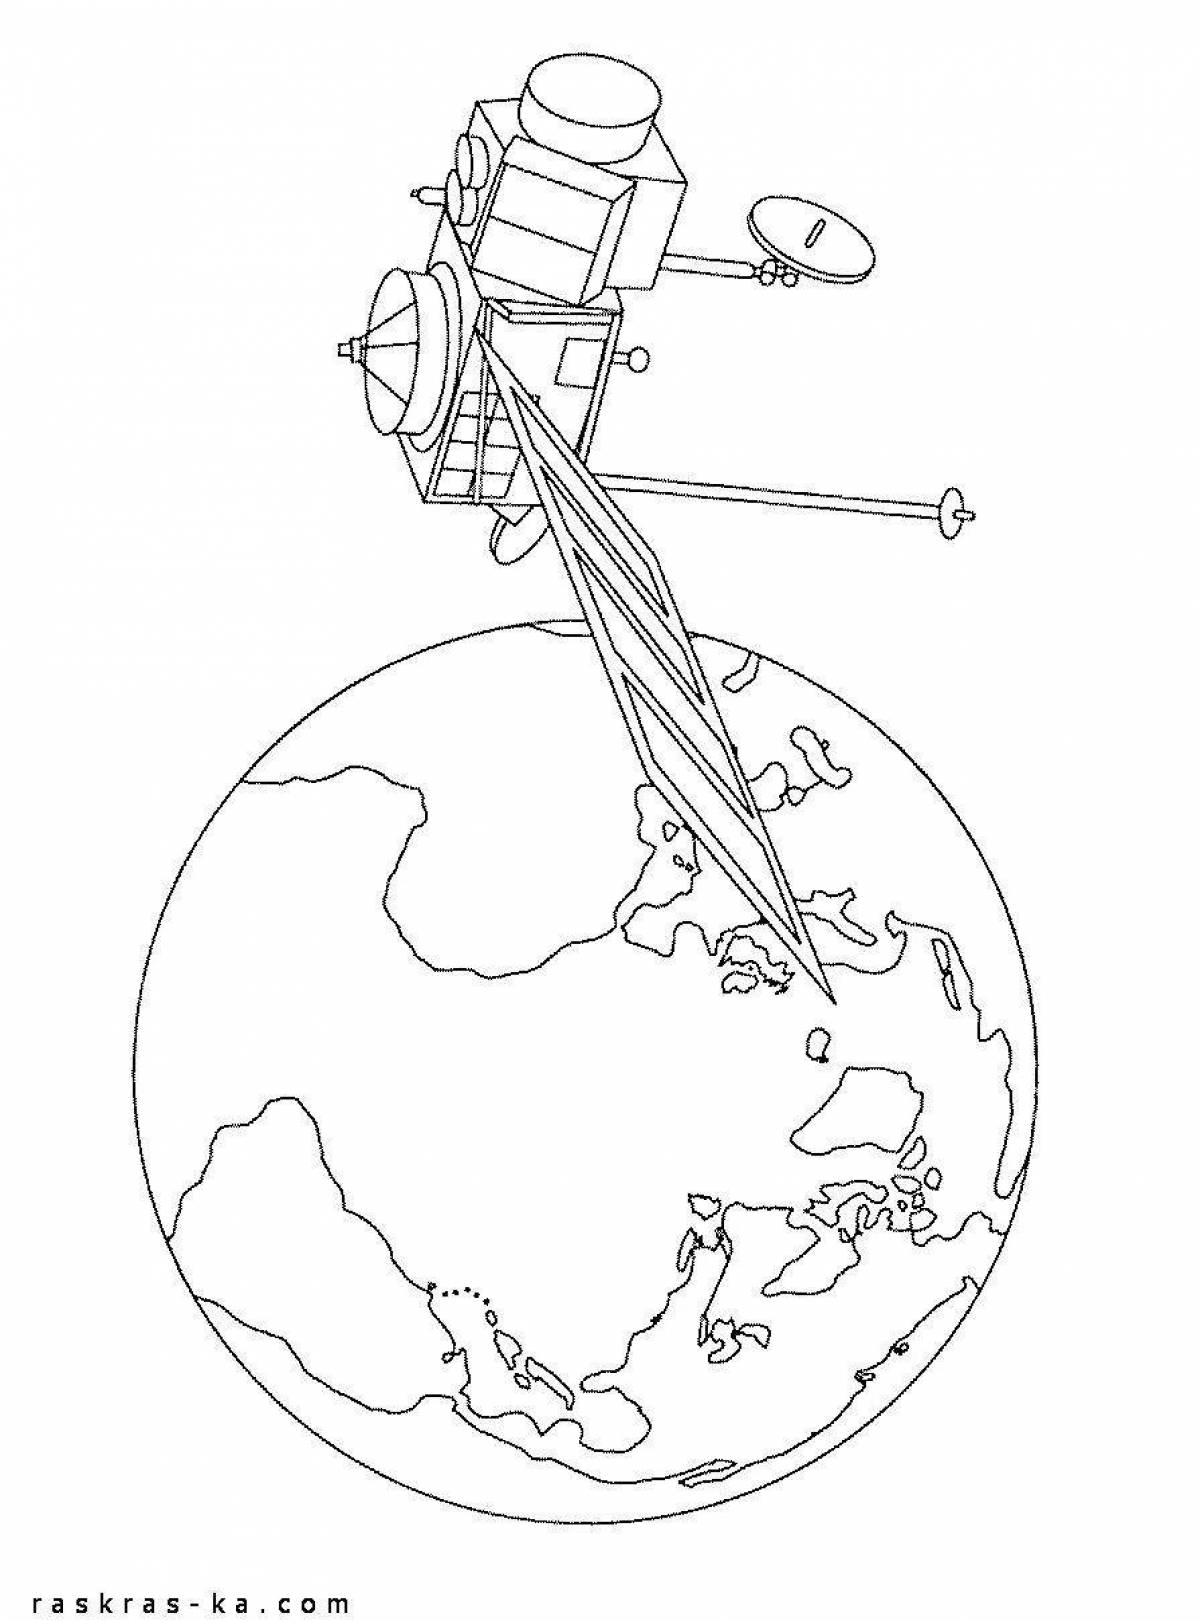 Out of this world space station coloring page